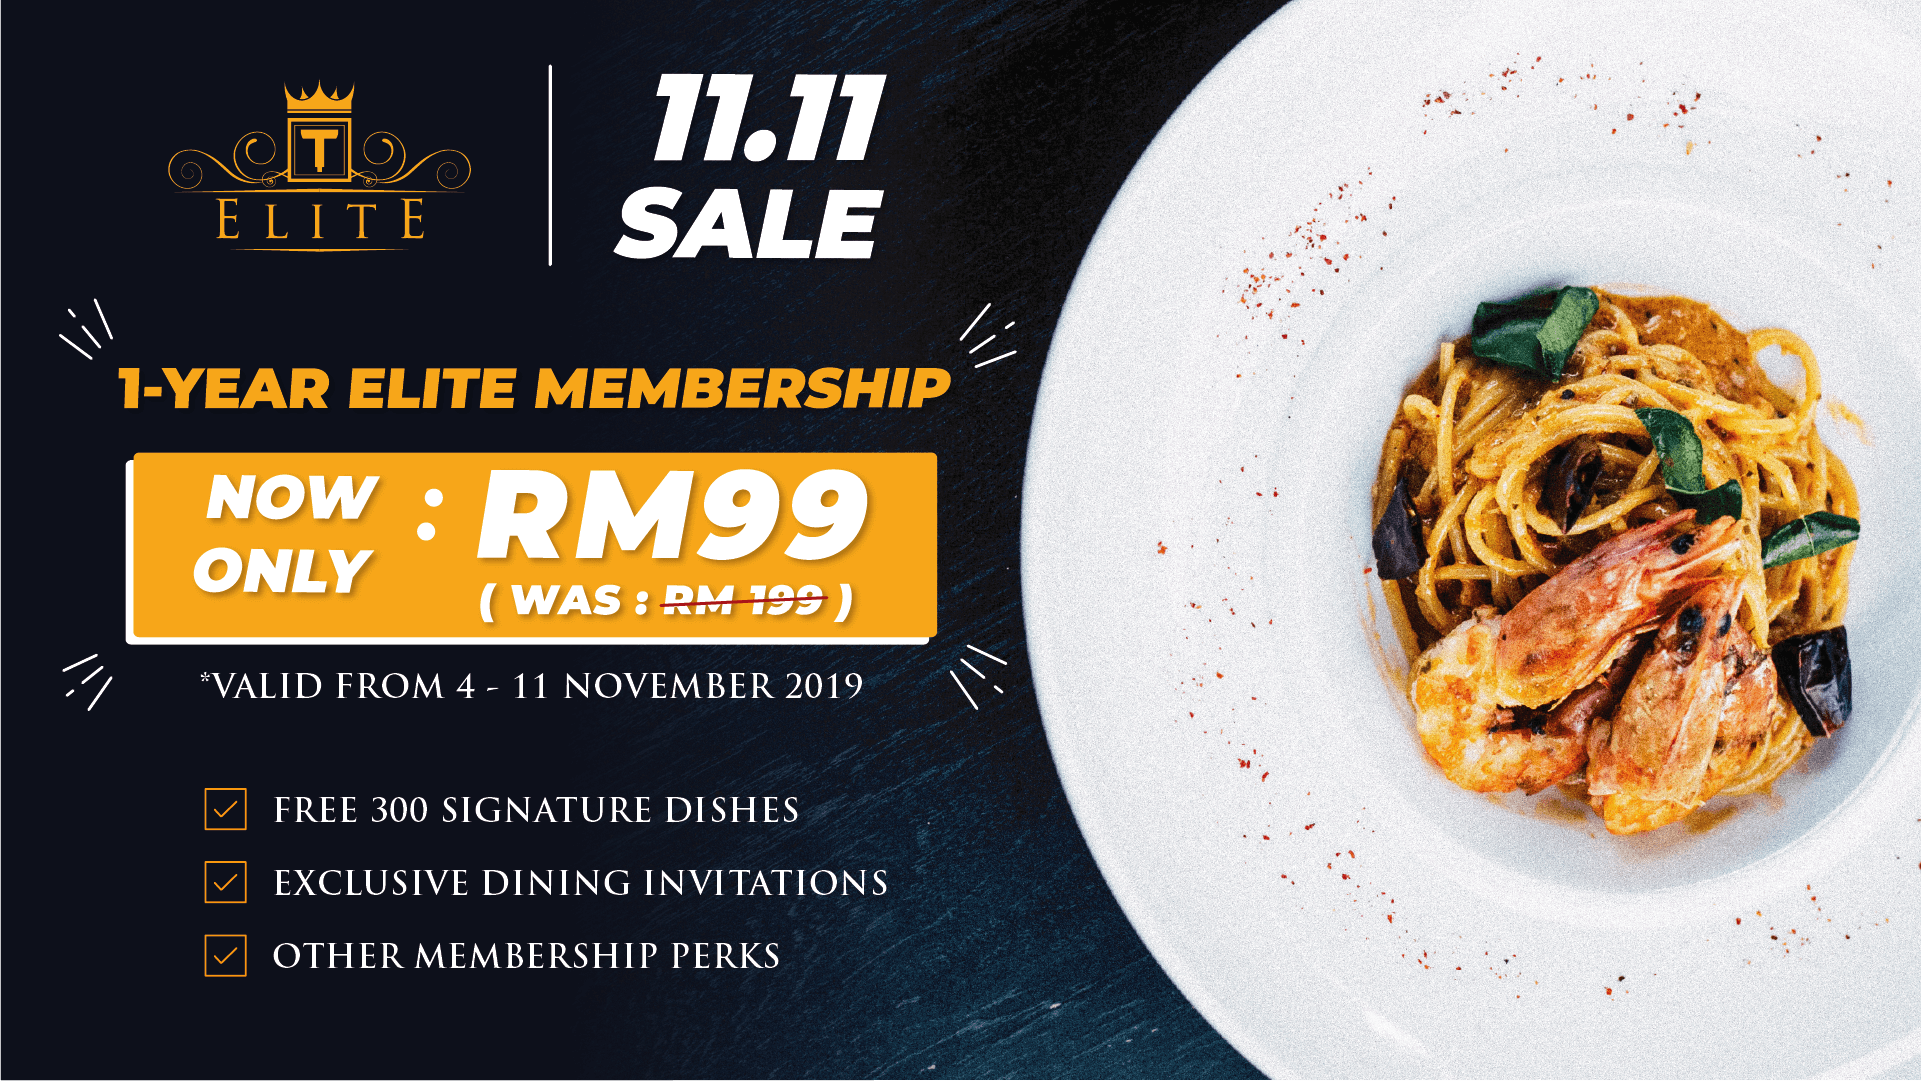 1111 Sale - Only RM99 for 1-Year ELITE Membership!